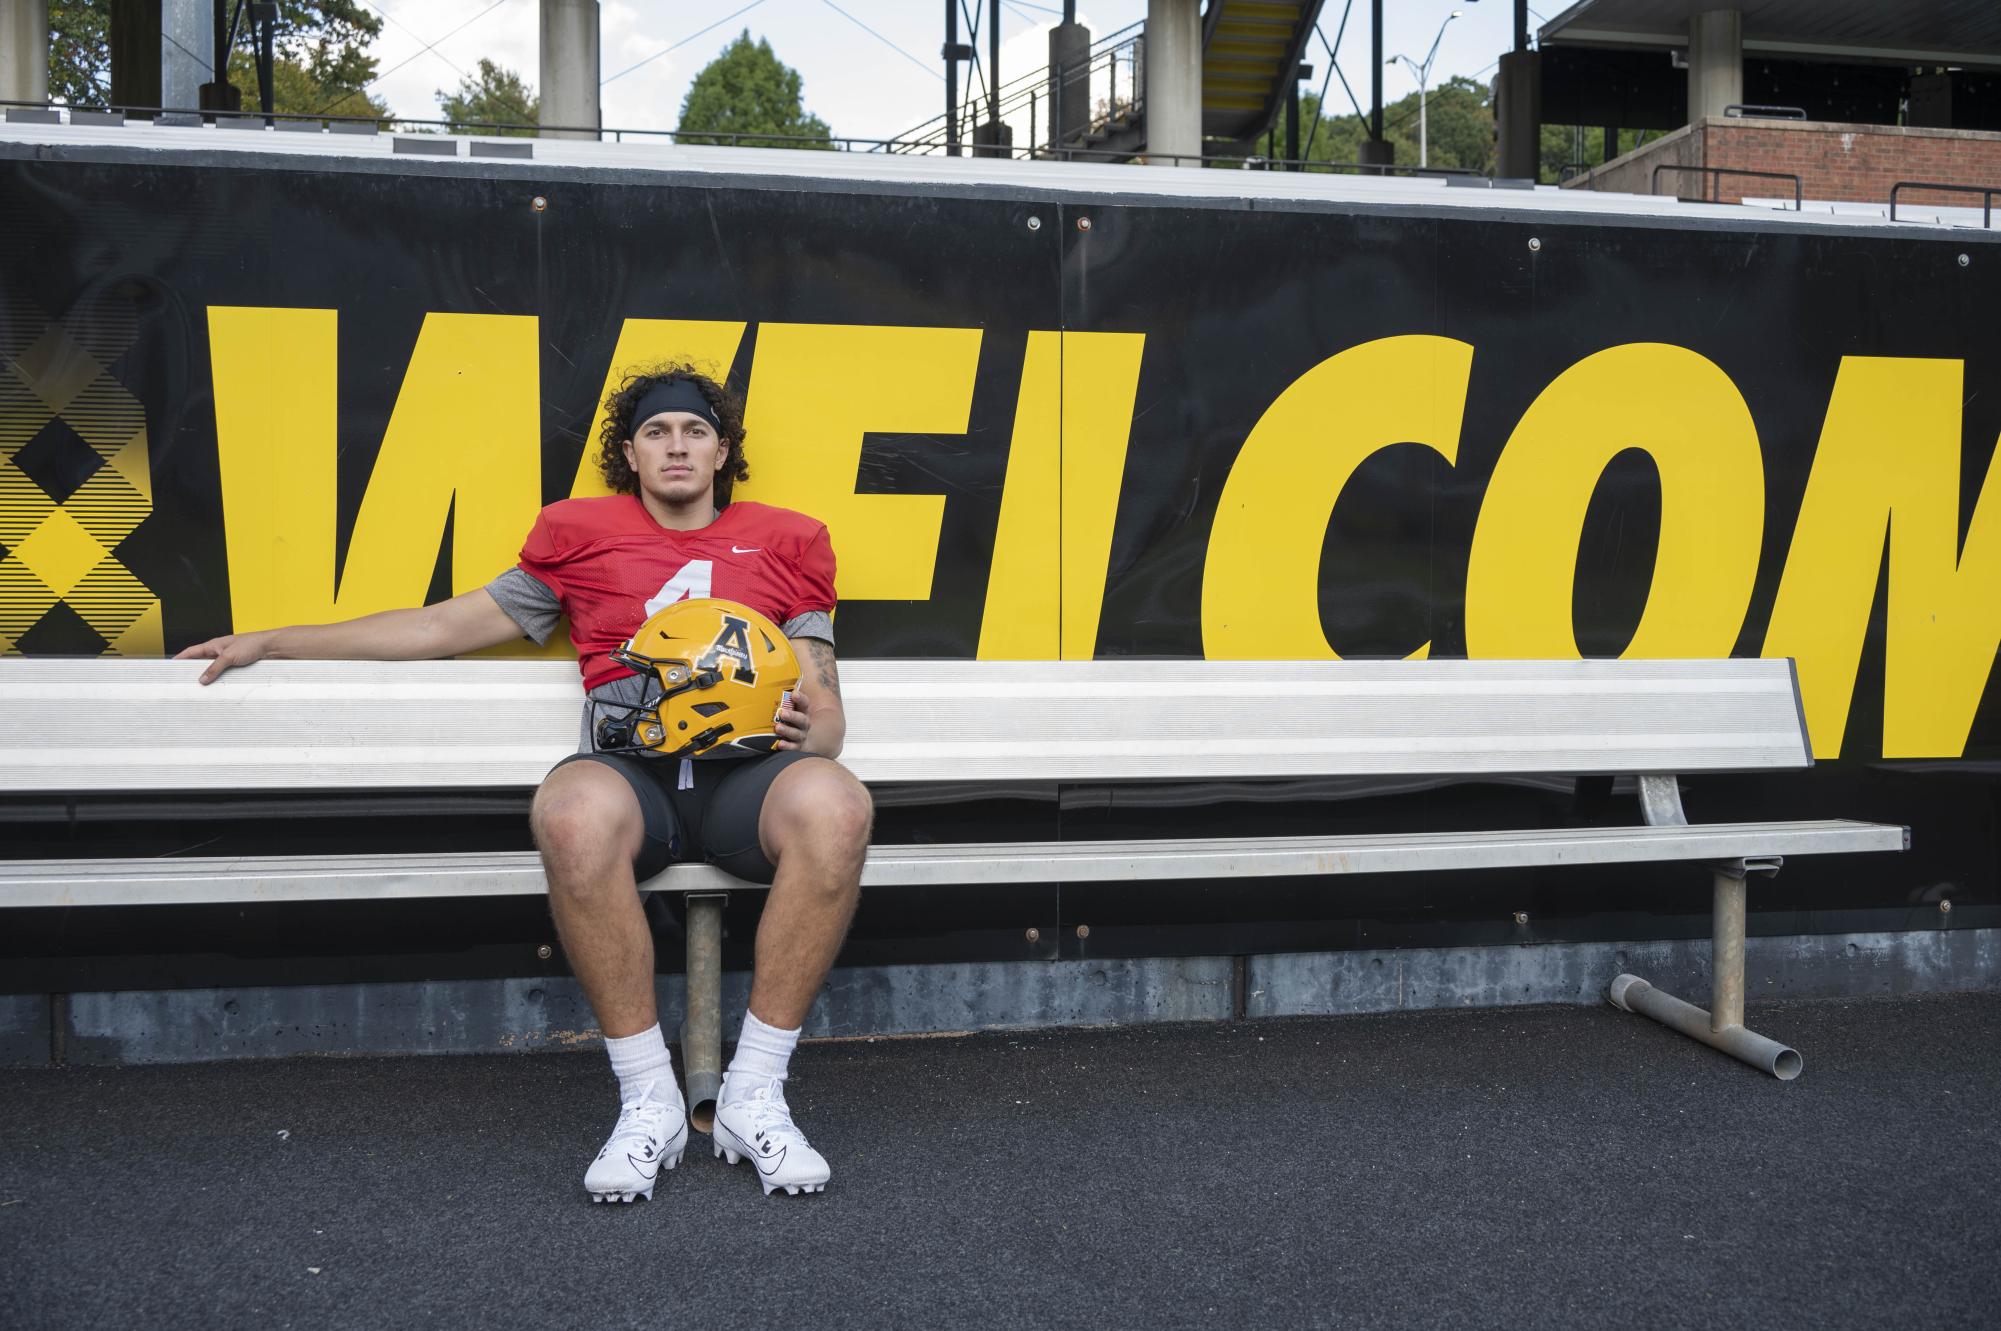 Junior communication studies major Joey Aguilar, has taken on the role as starting quarterback since App State’s first game against Gardner-Webb, and is currently leading the team to a 6-4 record overall. Aguilar, who hails from California, has secured his position by averaging 267 passing yards per game and has a 64% completion rate Oct. 4, 2023.